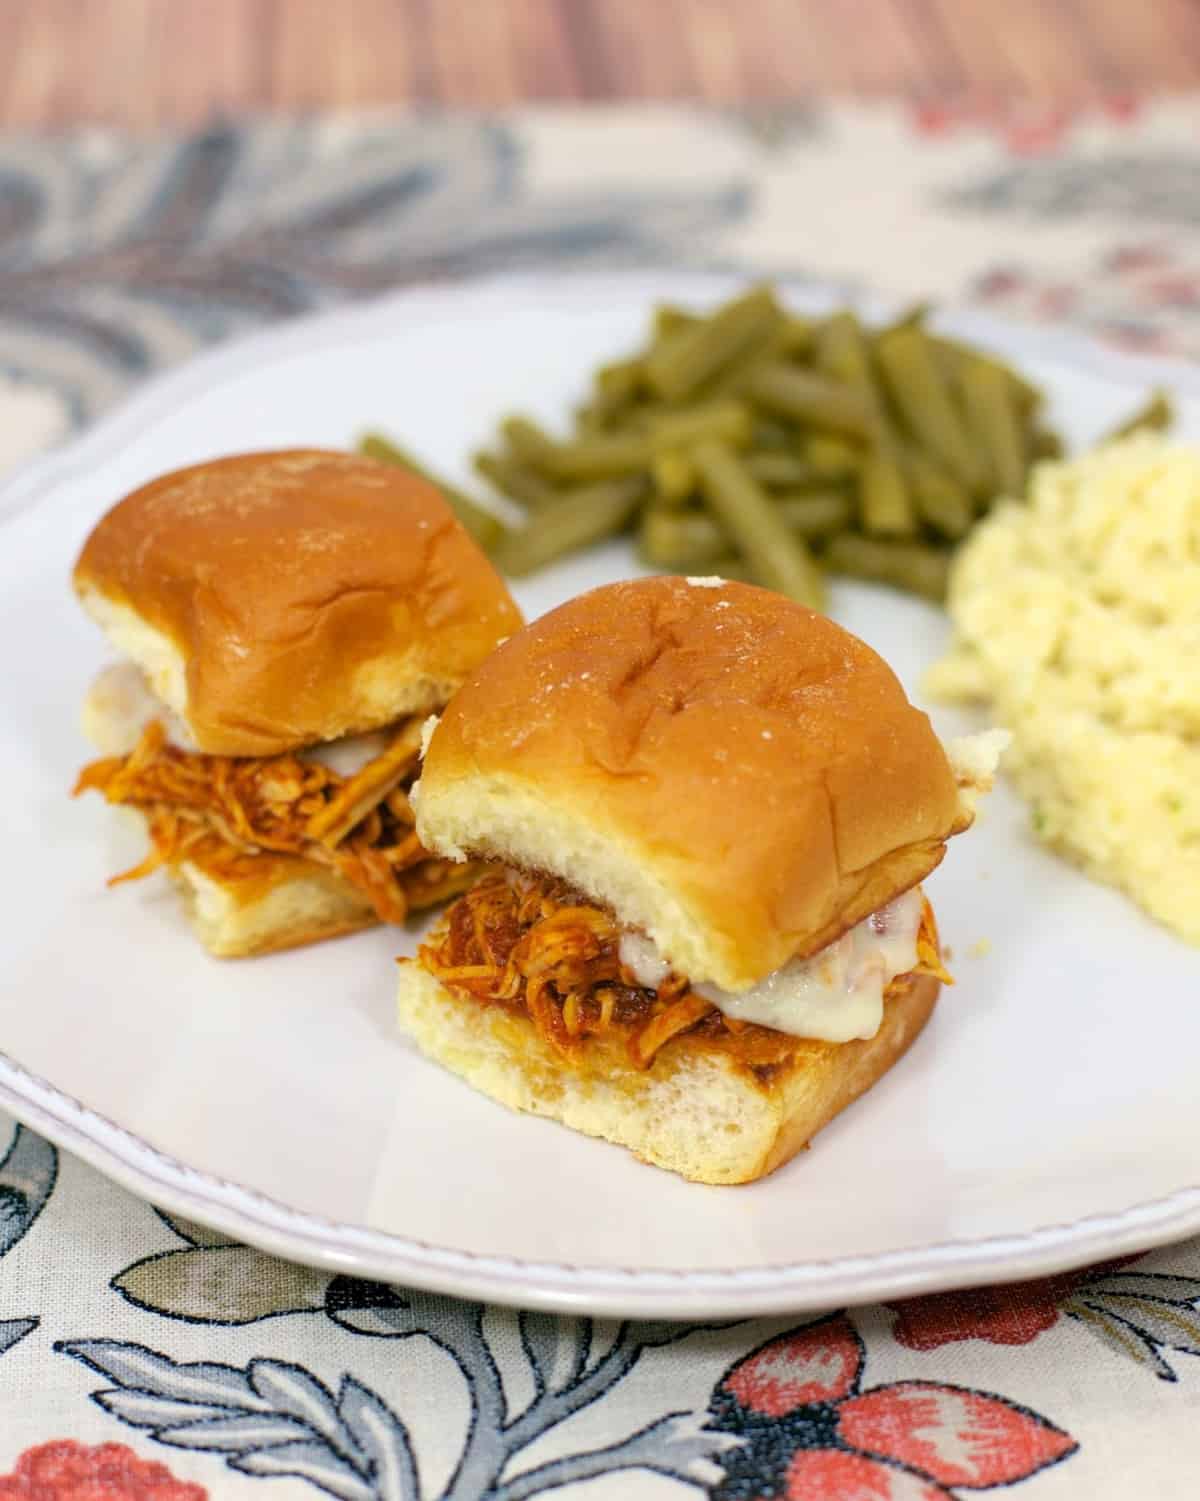 Slow Cooker Chicken Parmesan Sliders - only 3 ingredients for the chicken! Chicken, spaghetti sauce, garlic, mozzarella cheese and buns. Great for an easy weeknight meal or tailgating. Everyone cleaned their plate!!